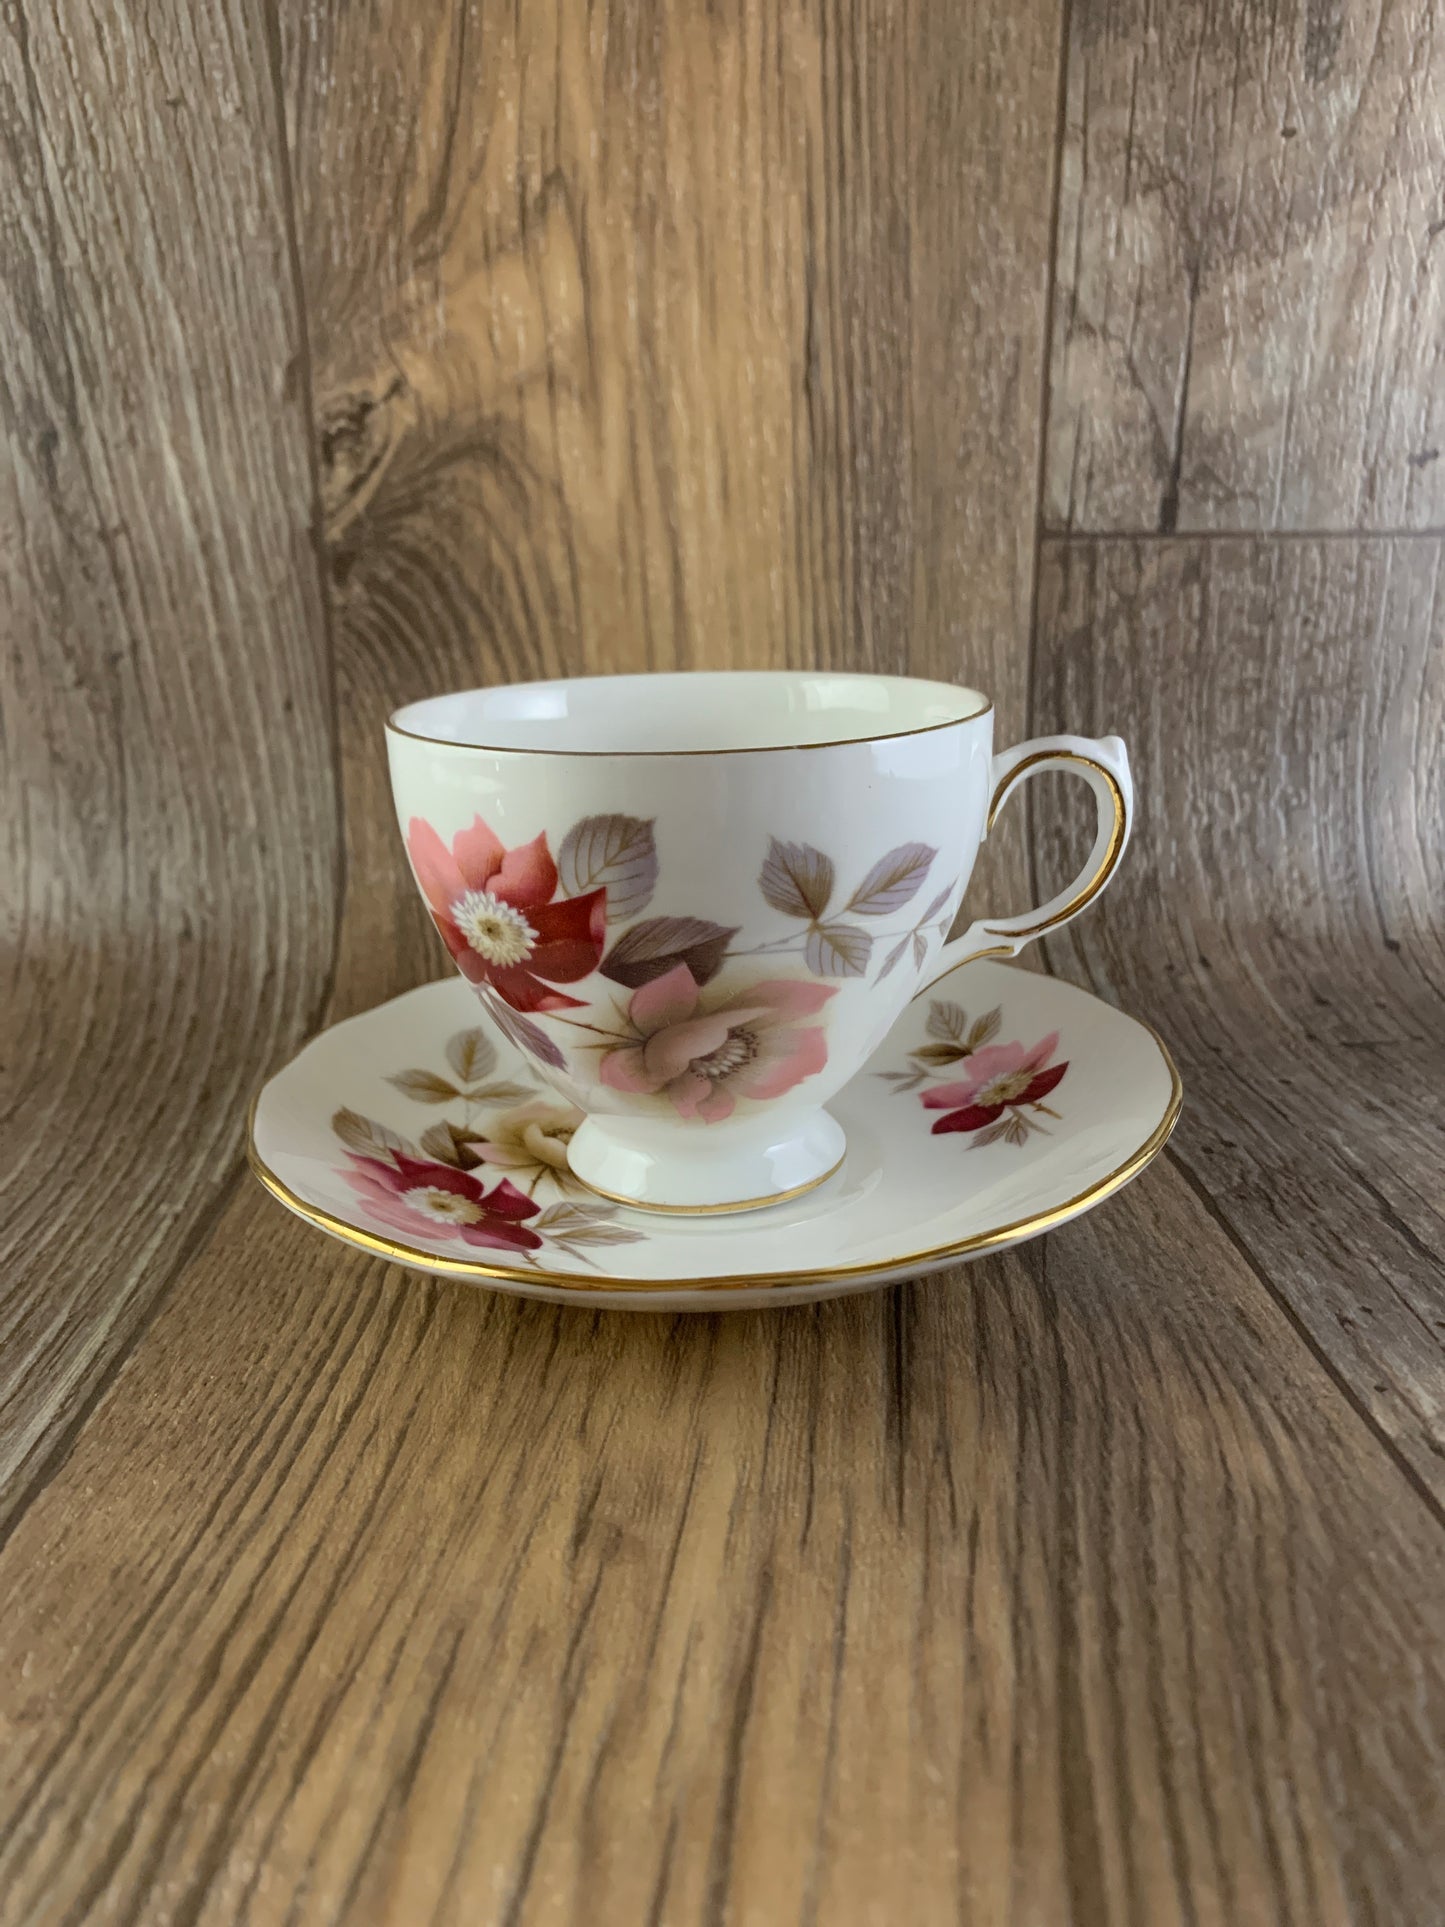 Vintage Royal Vale Tea Cup and Saucer with Pink Roses